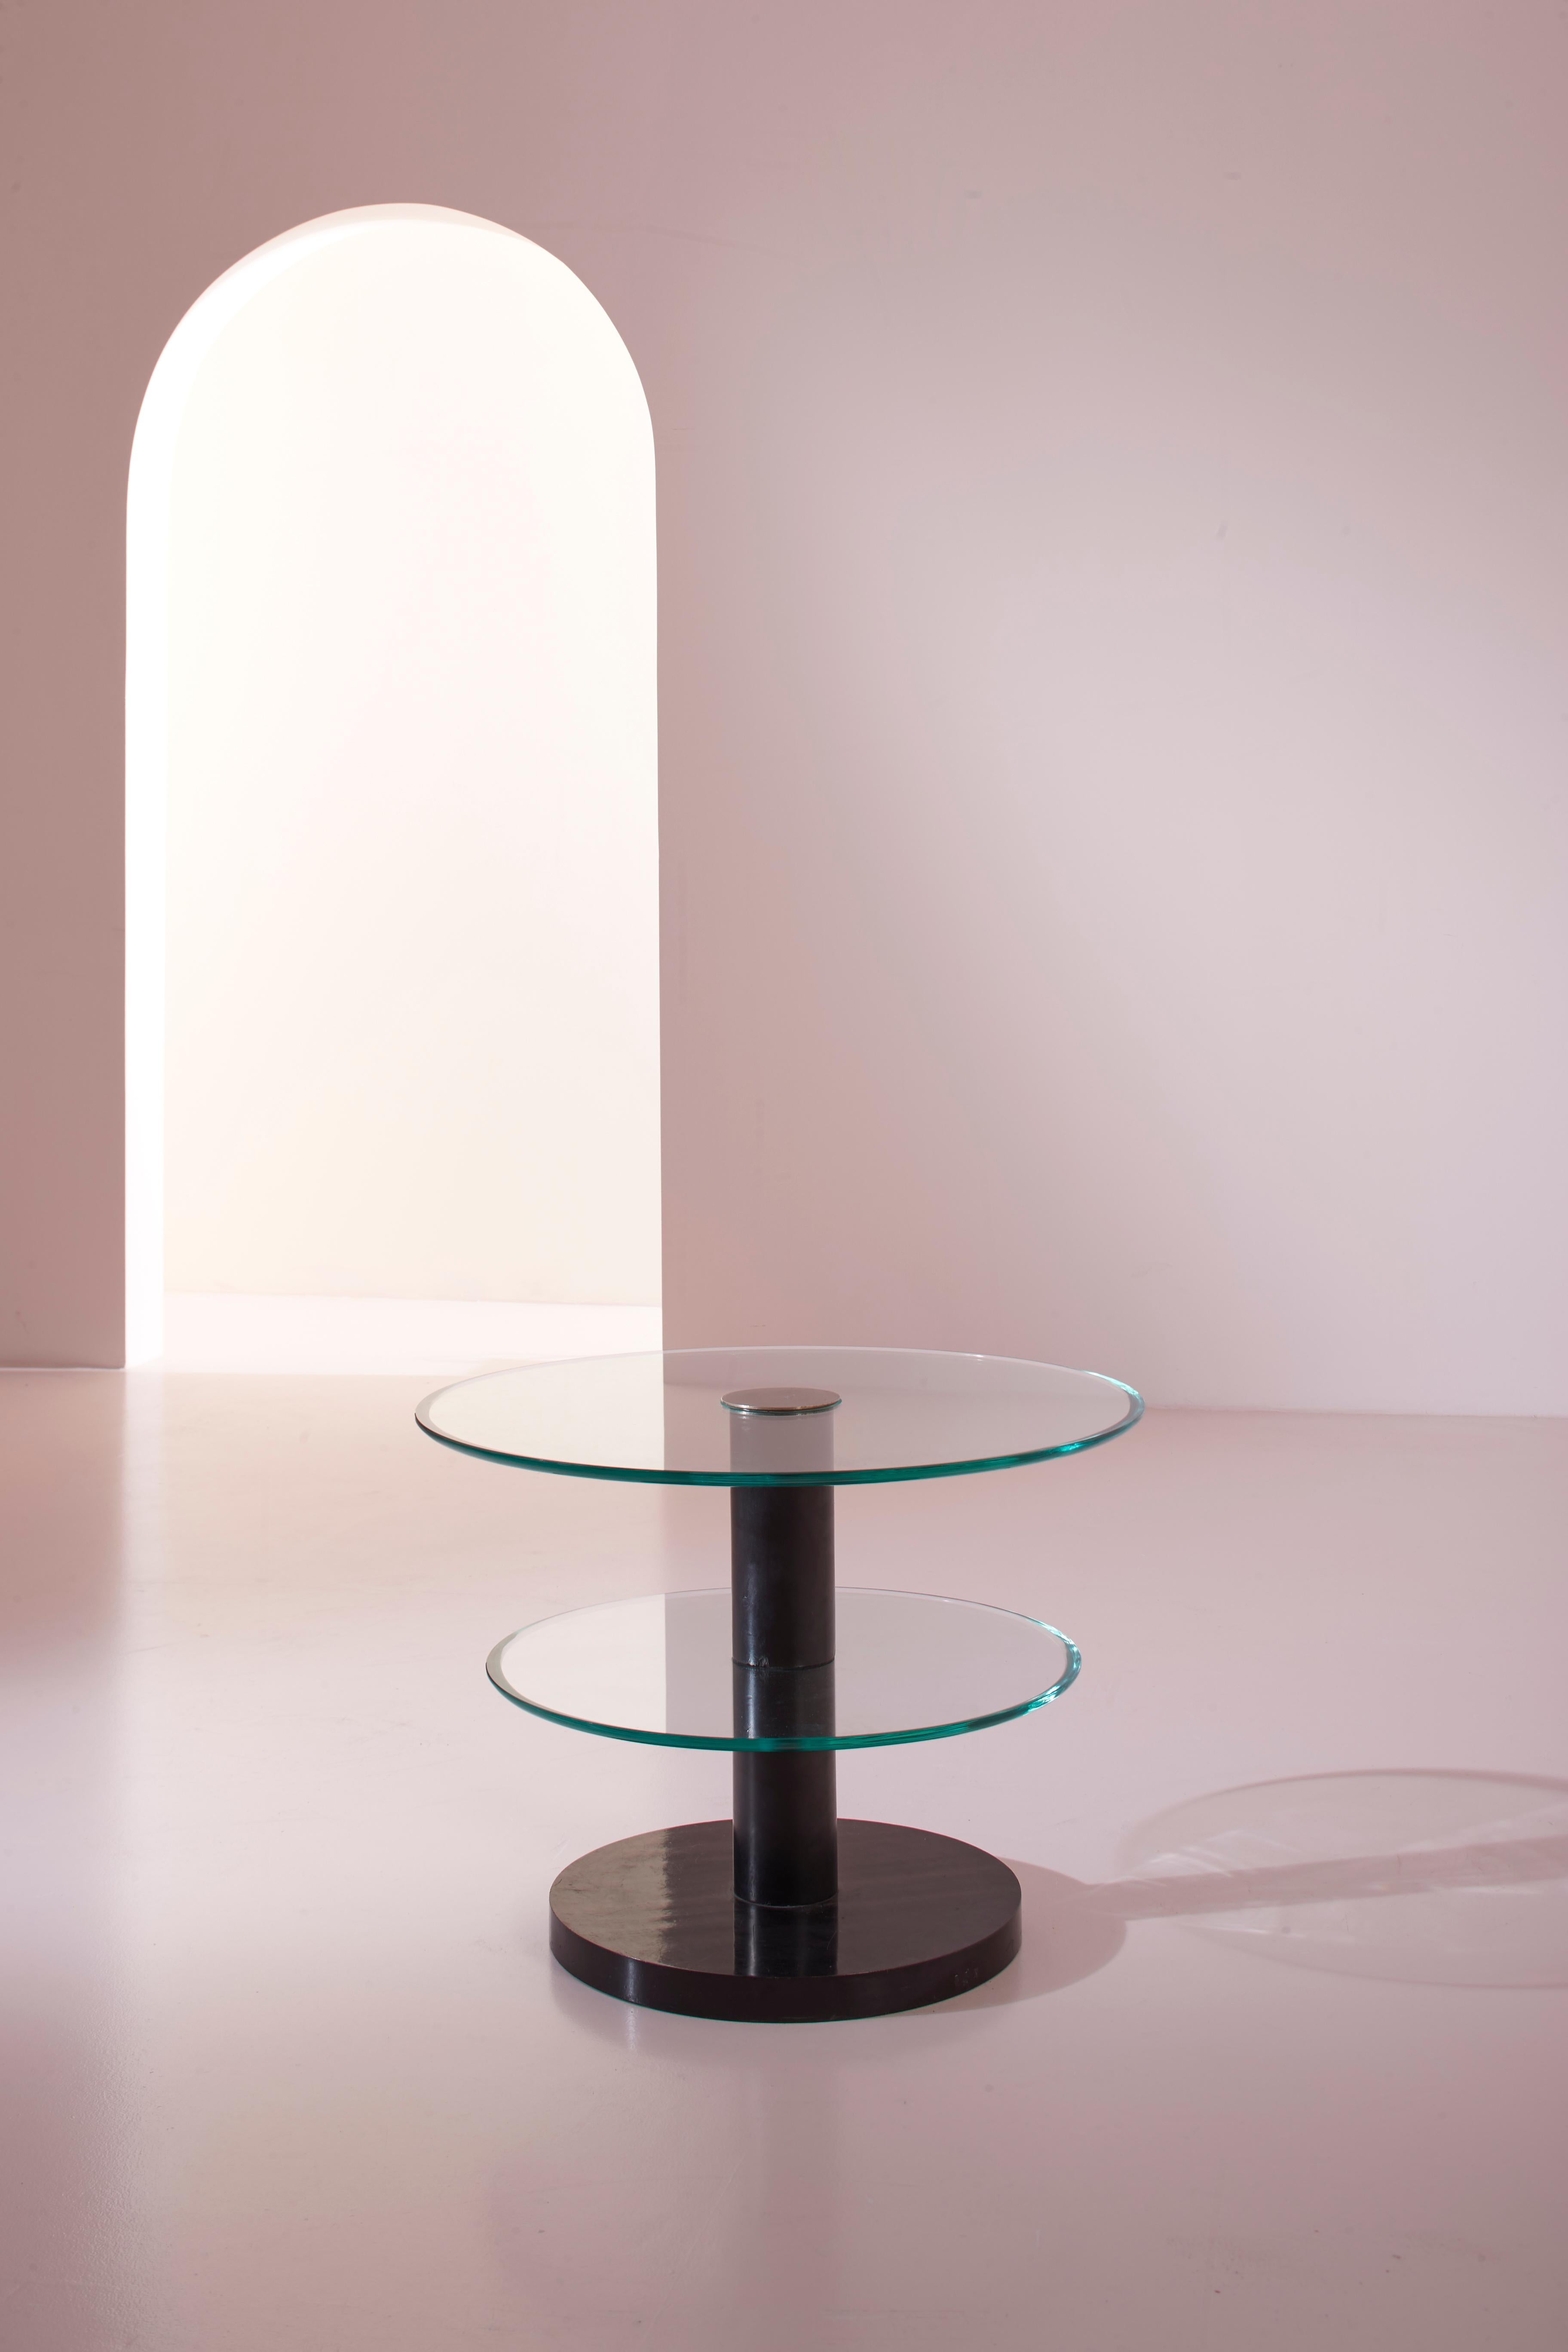 An occasional table with a black lacquered wood base and ground glass tops, designed by Gio Ponti in 1932 and produced by the Italian company Luigi Fontana & C.

This side table, though small in size, embodies the era when international aesthetic